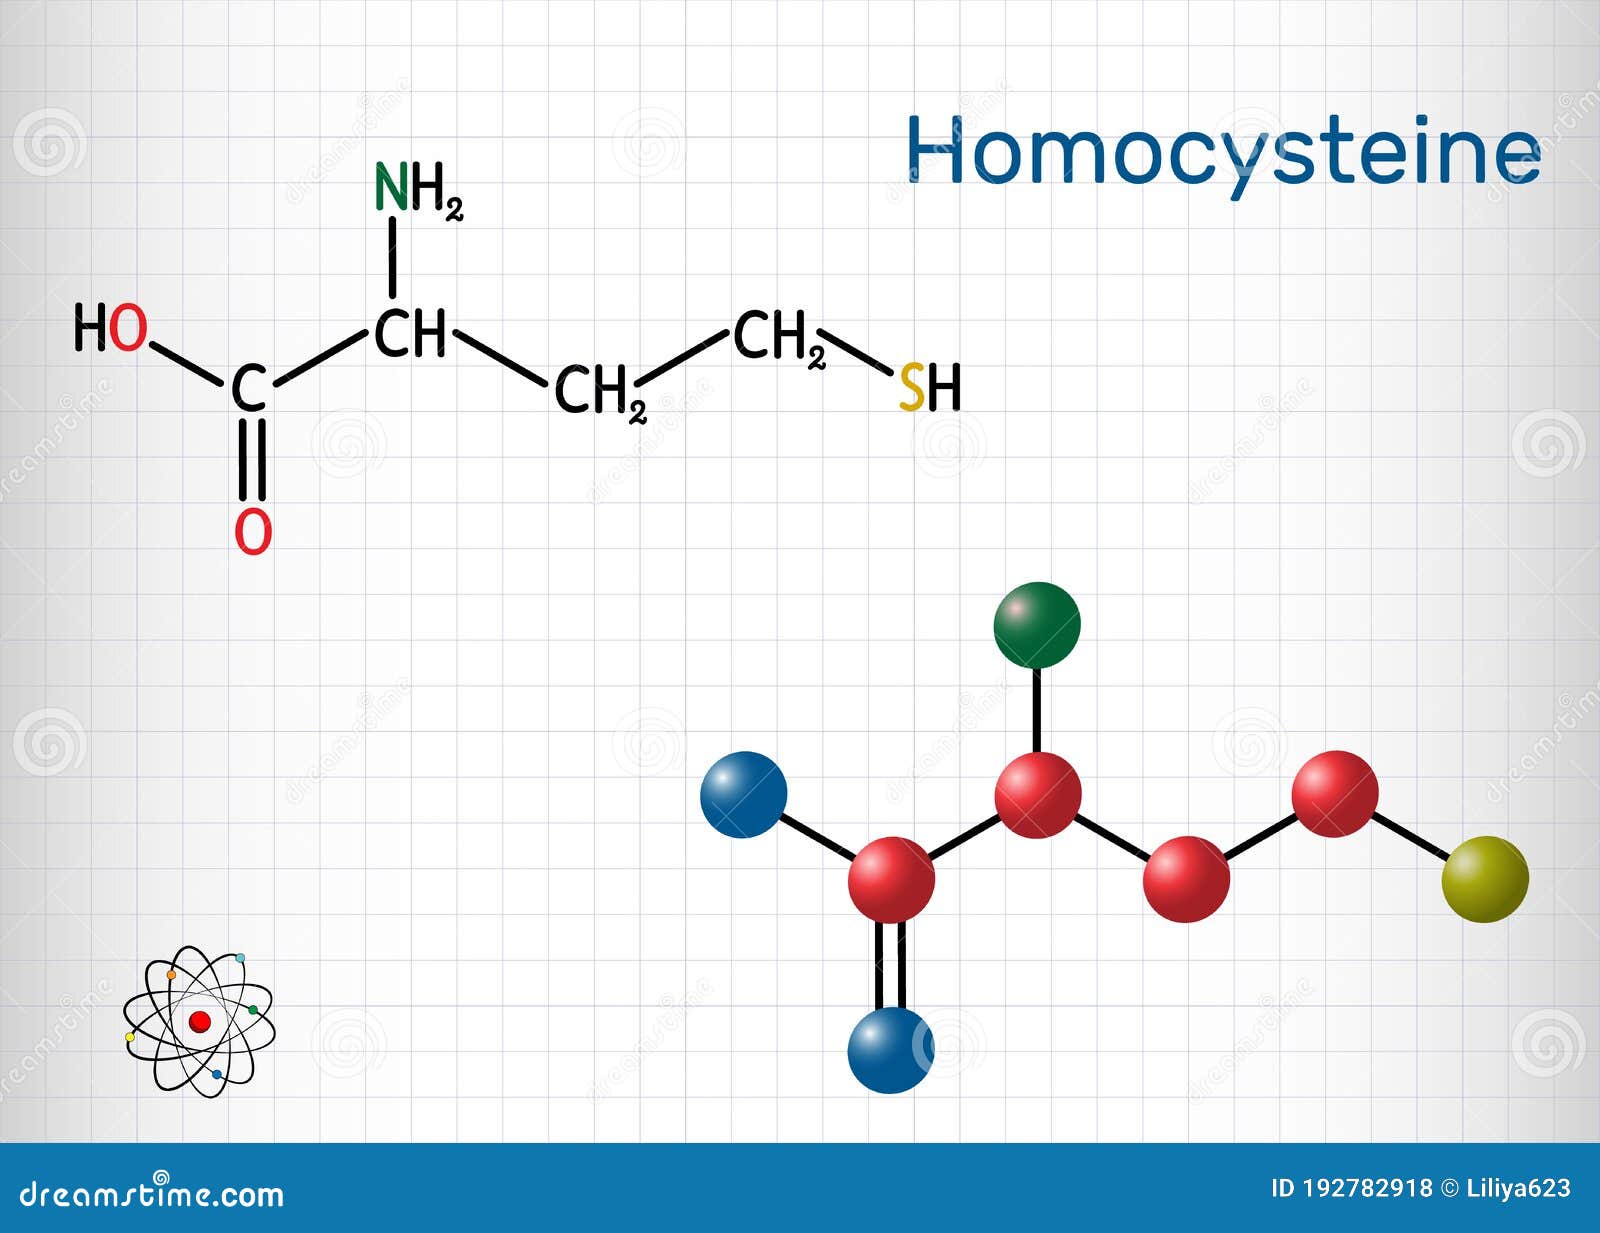 homocysteine biomarker molecule. it is a sulfur-containing non-proteinogenic amino acid. structural chemical formula and molecule